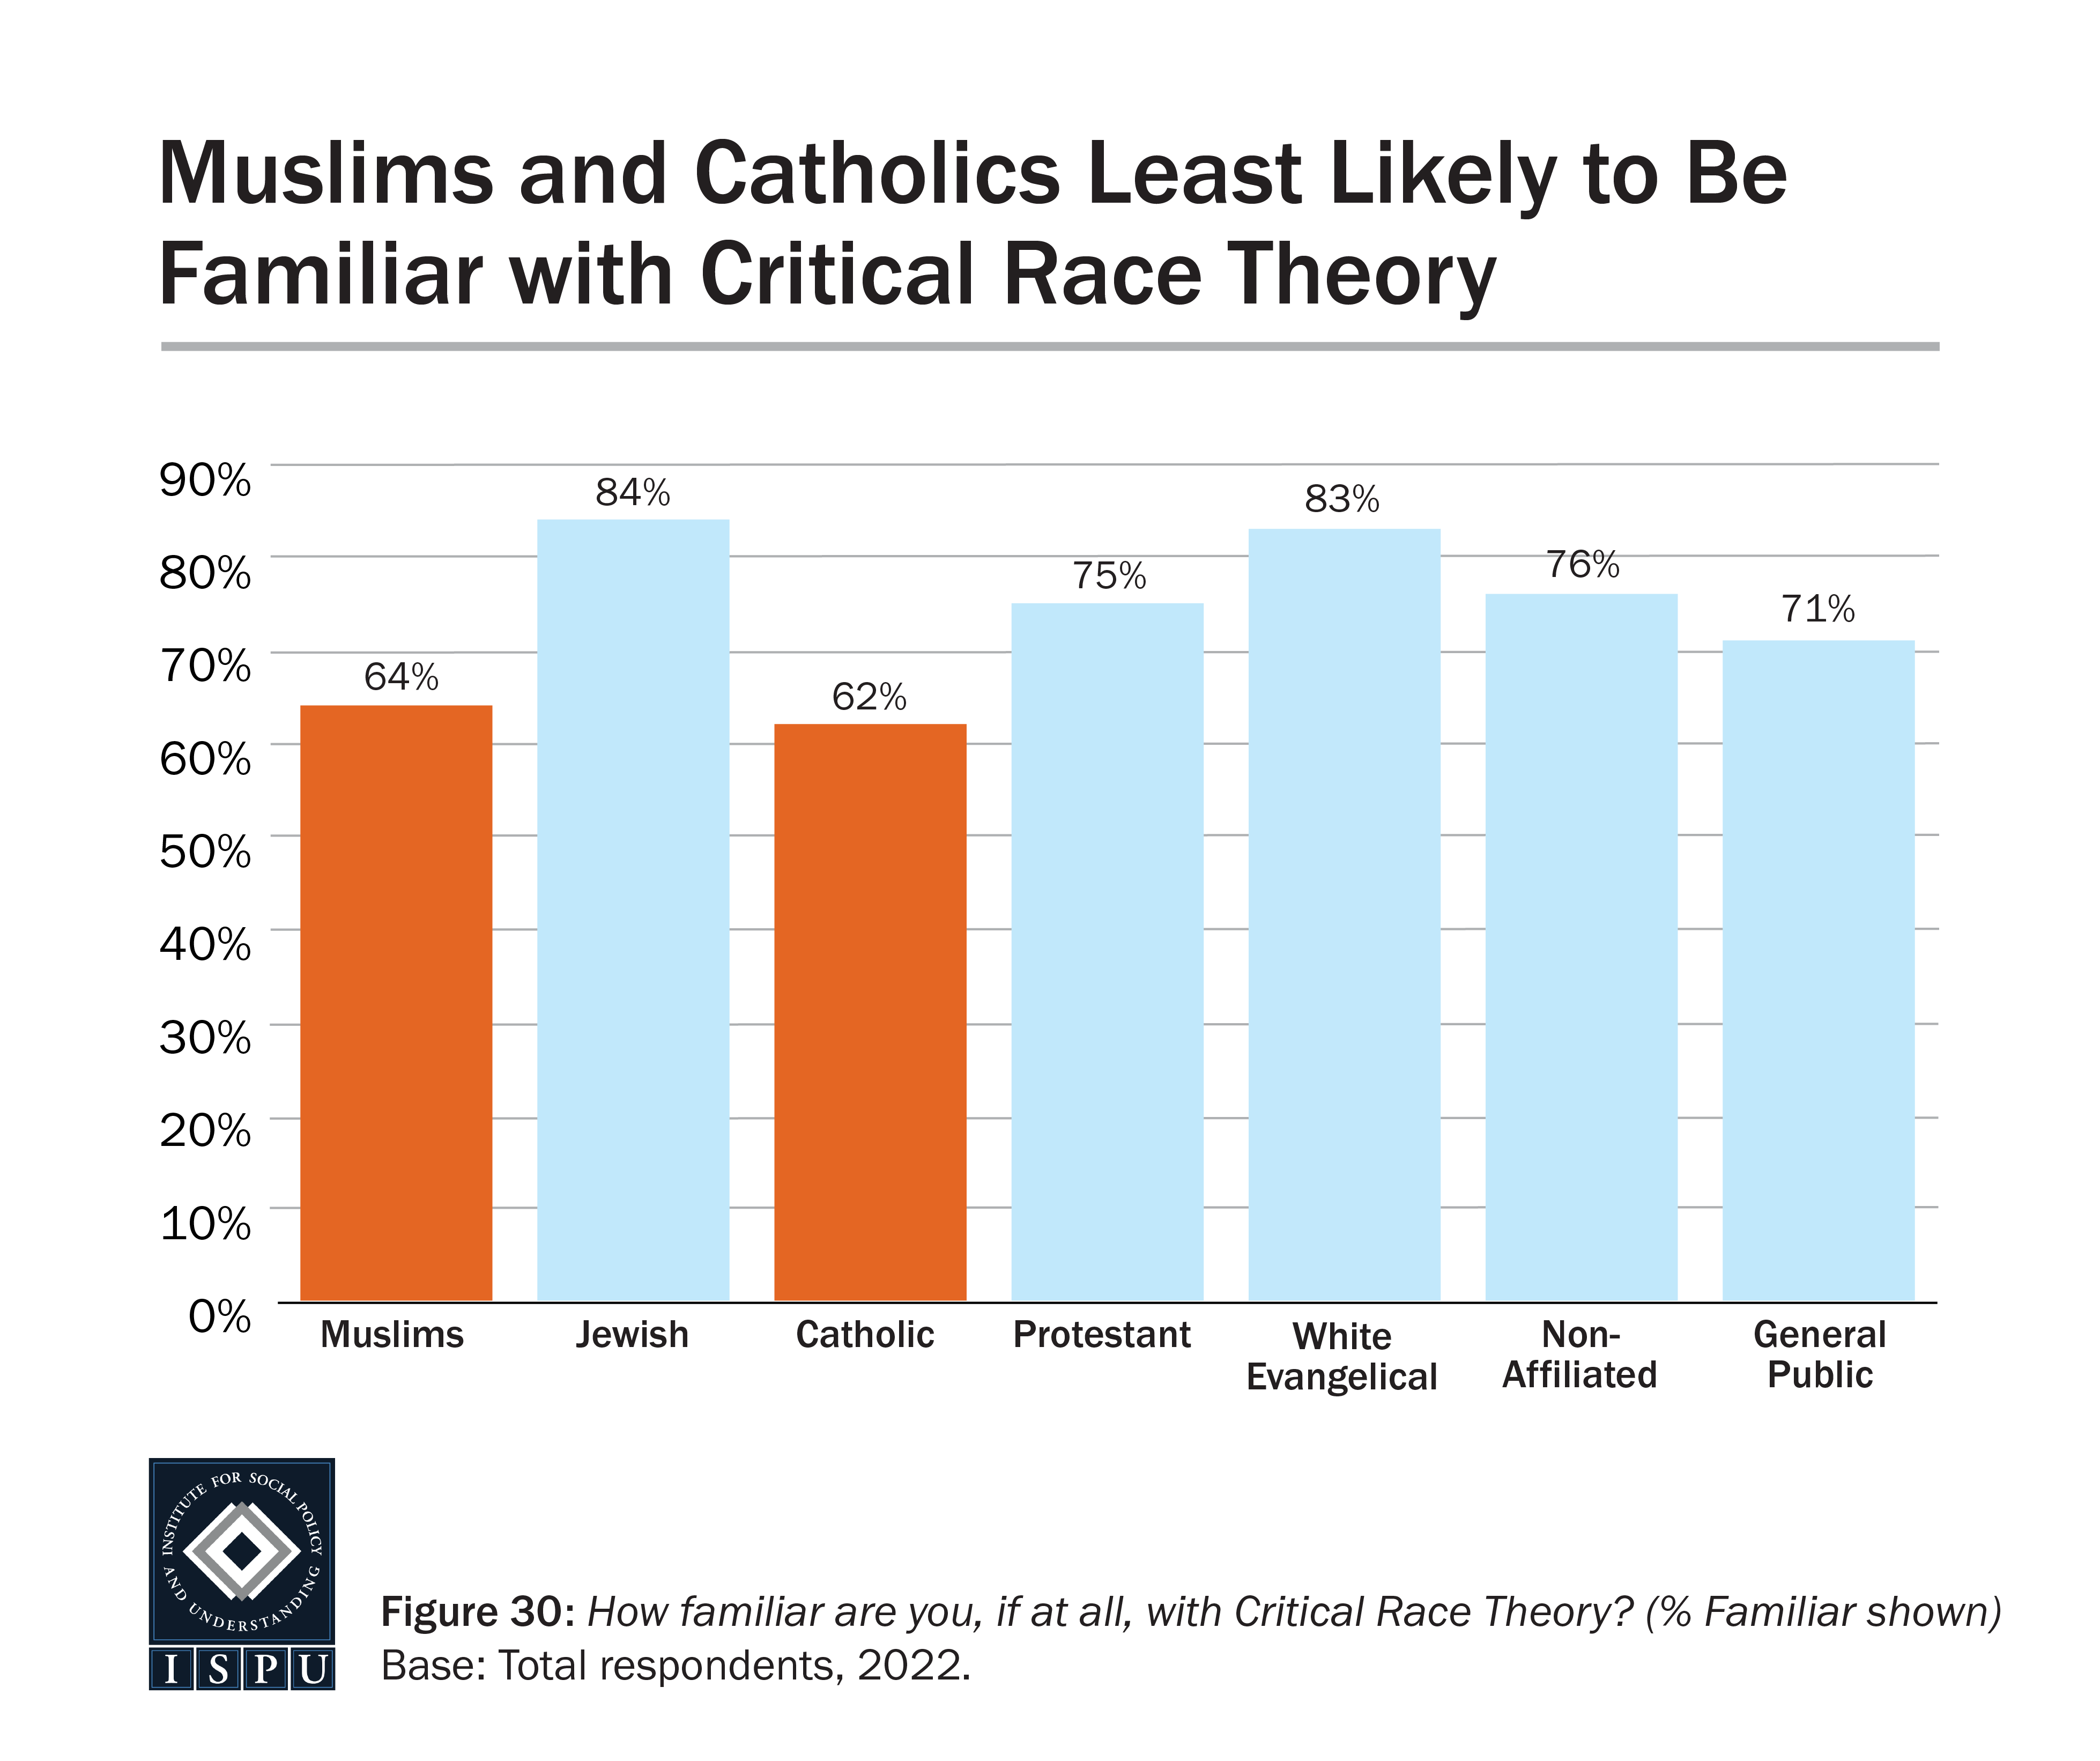 A bar graph showing level of familiarity with Critical Race Theory among all groups surveyed.